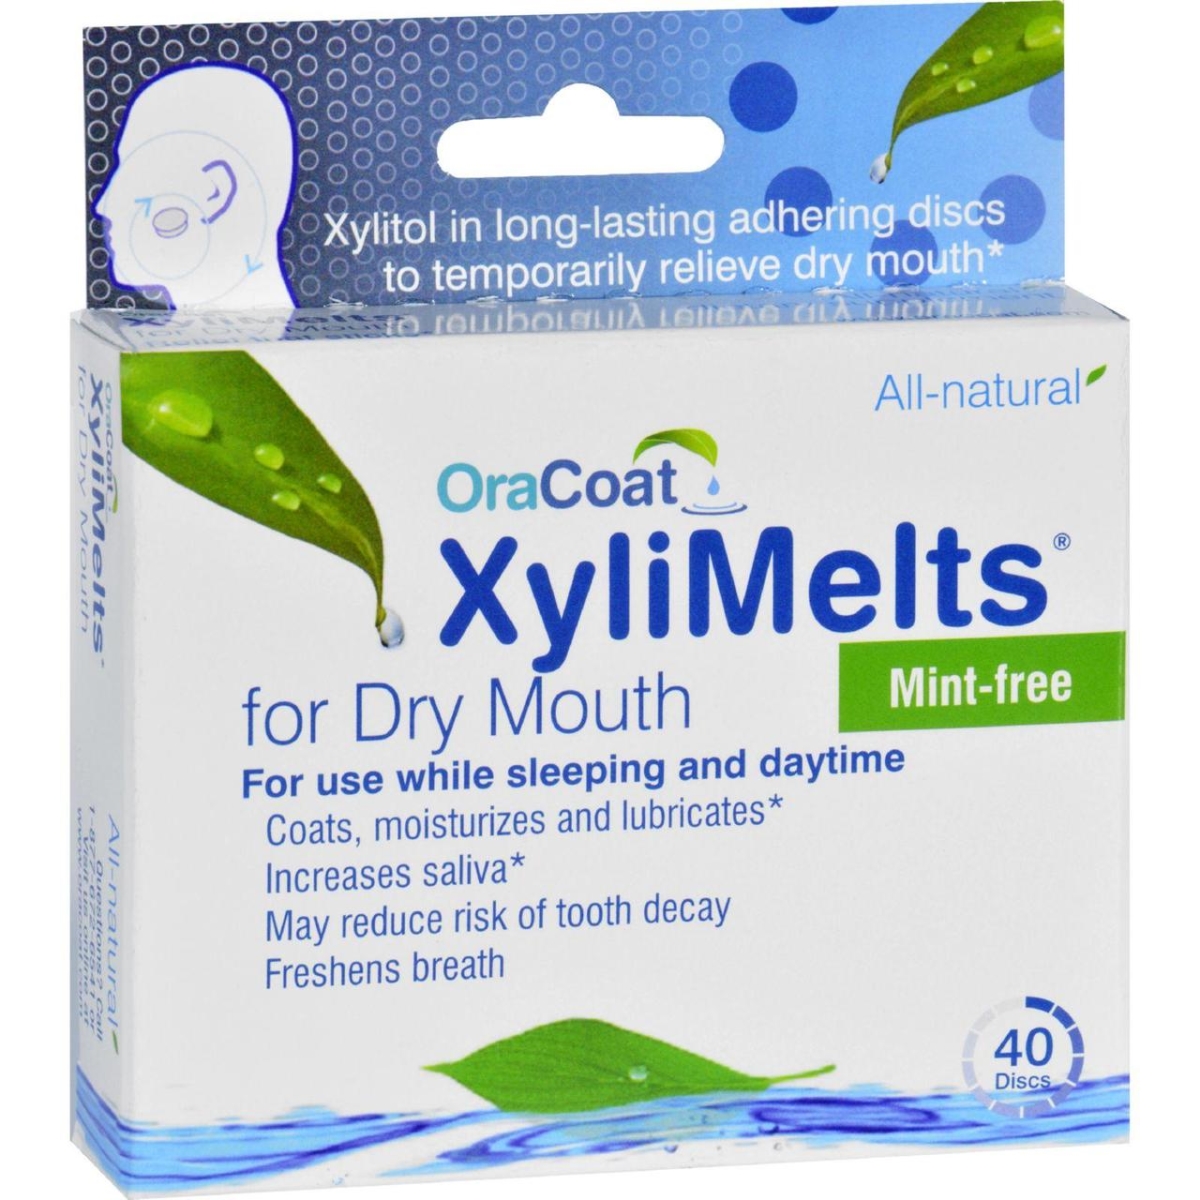 Hg1522036 Mint Free Xylimelts - Dry Mouth, 40 Count